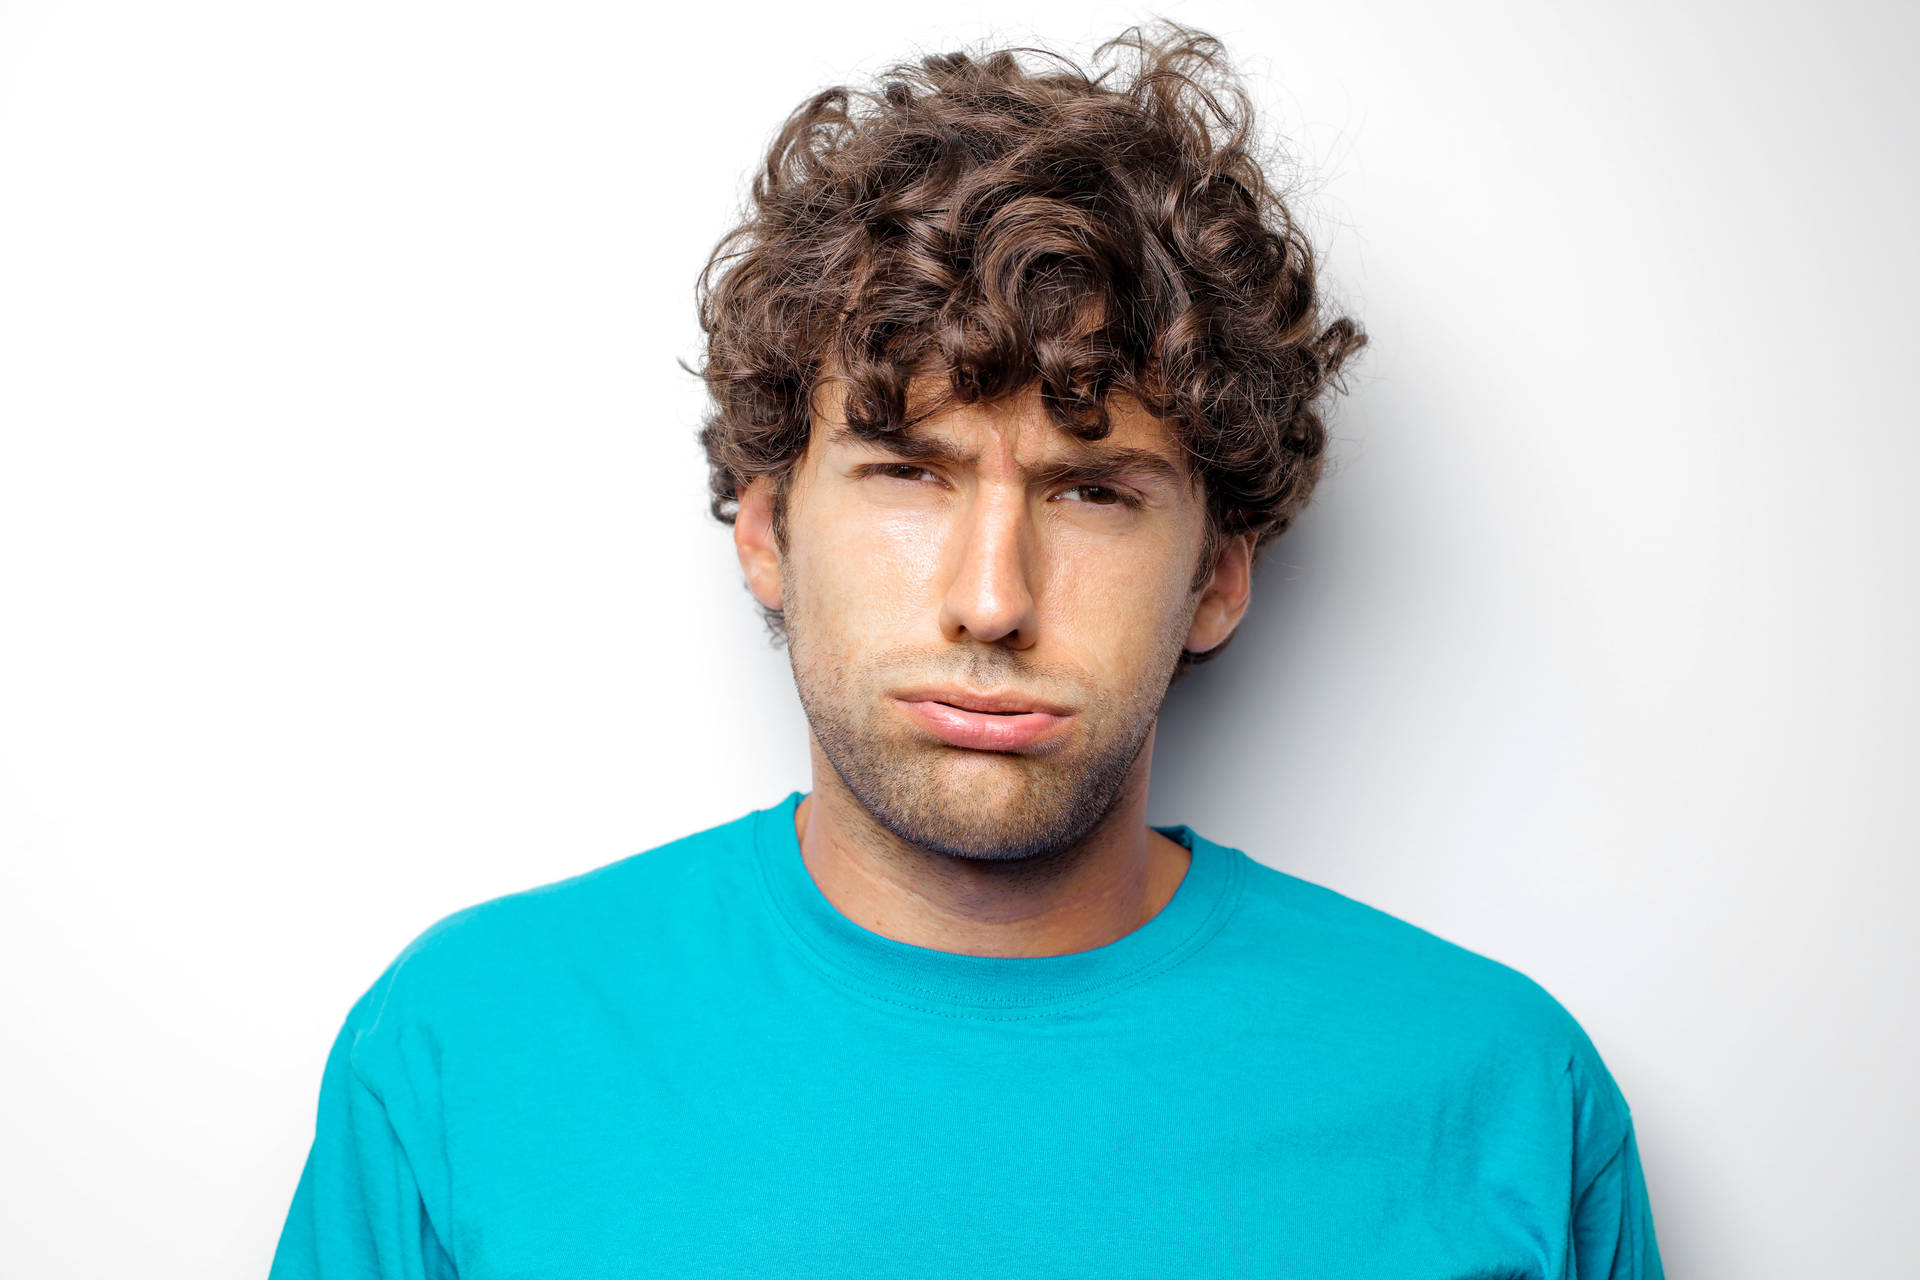 Headshot Of An Exhausted Man With Curly Hair Wallpaper